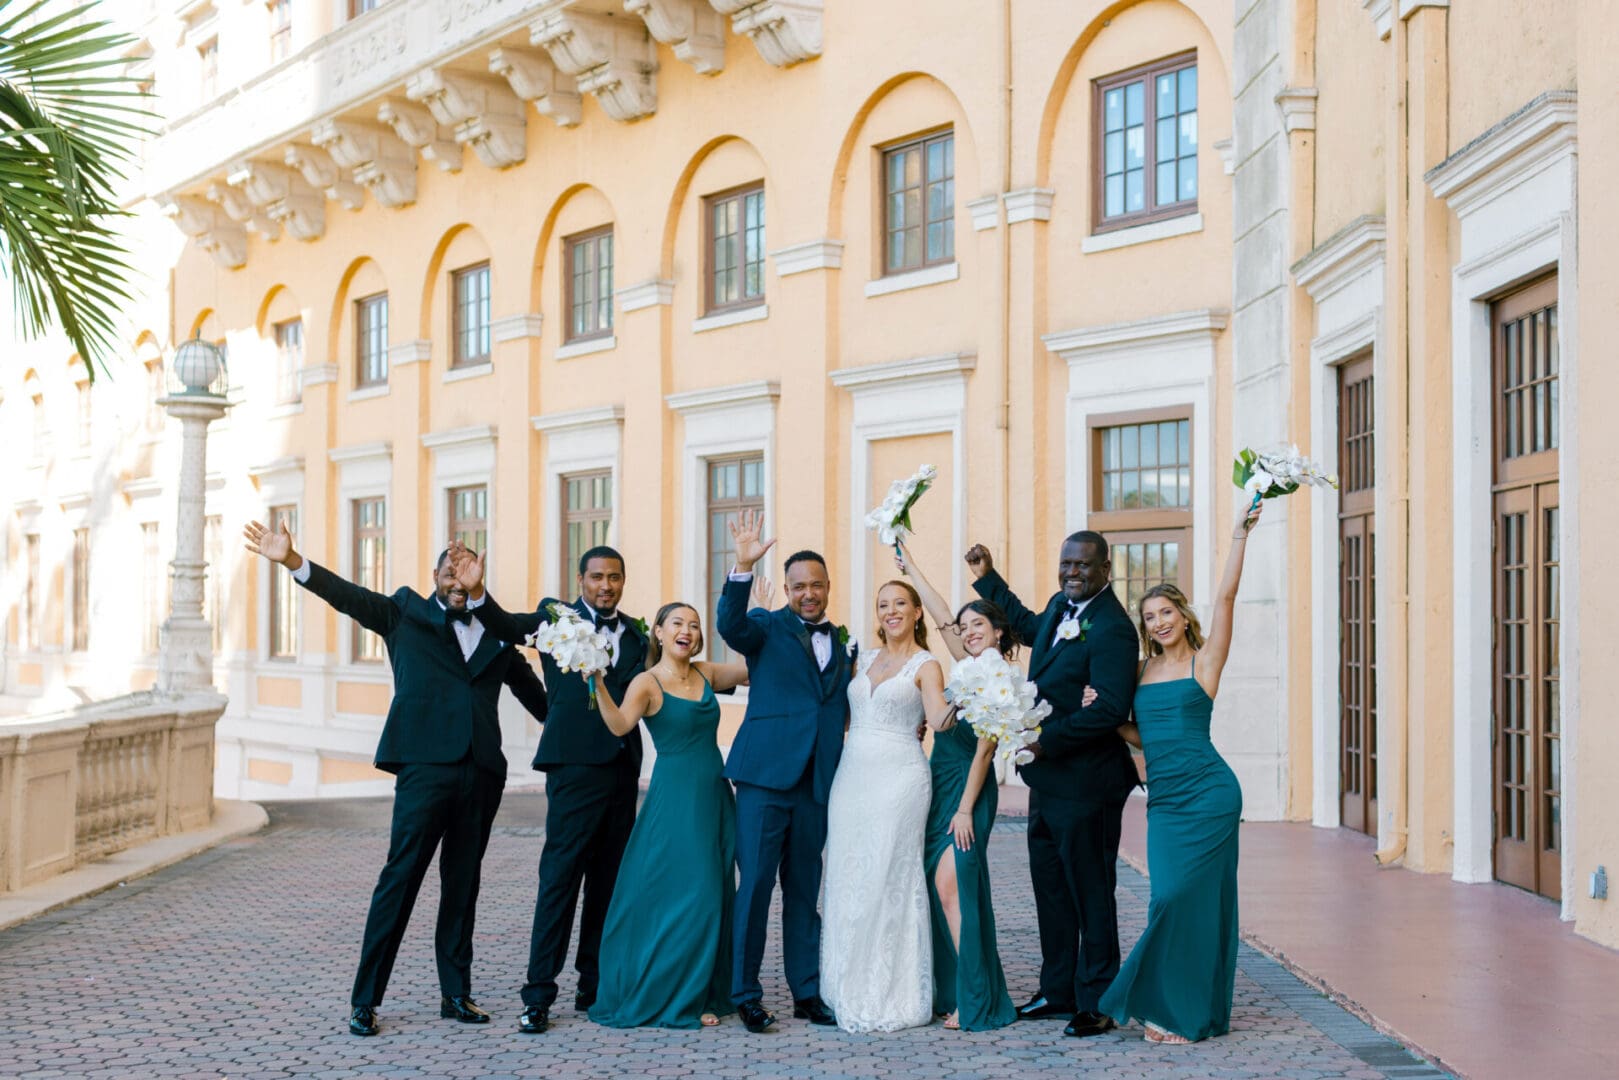 A joyful wedding group, including the bride and groom, celebrates outside a grand, peach-colored building, raising bouquets and arms in excitement.